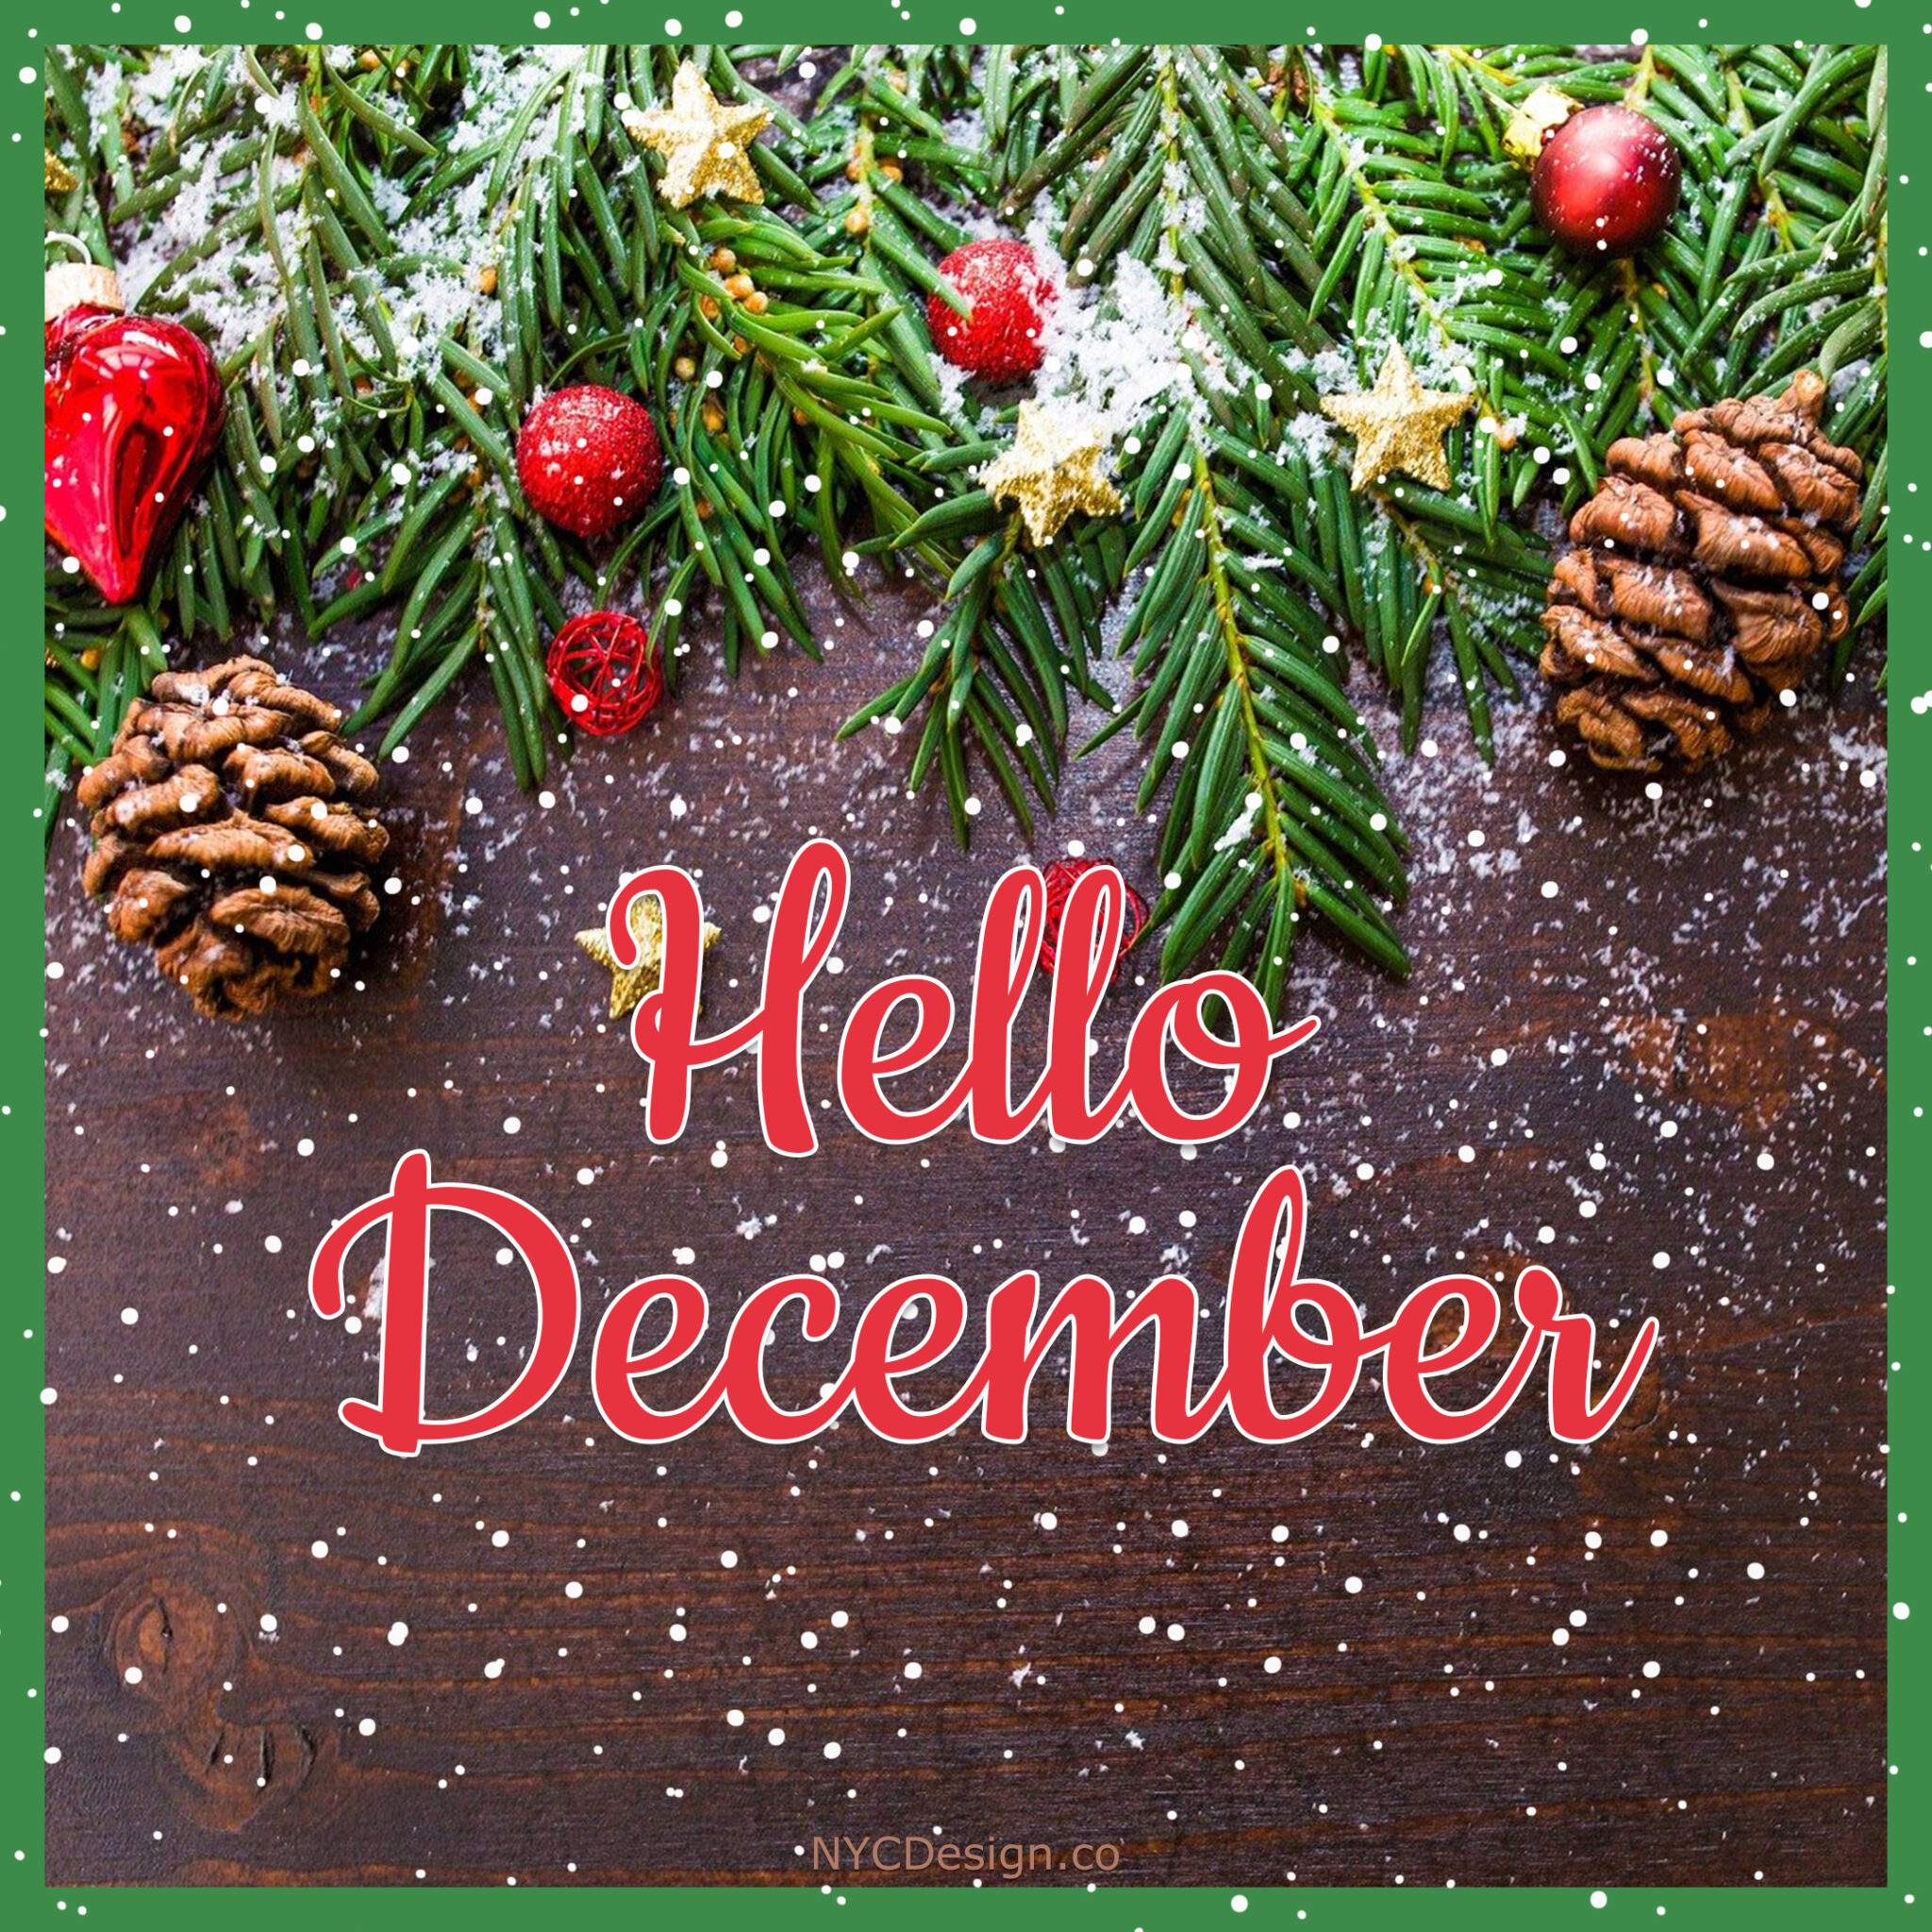 hello-december-images-for-instagram-and-facebook-nycdesign-co